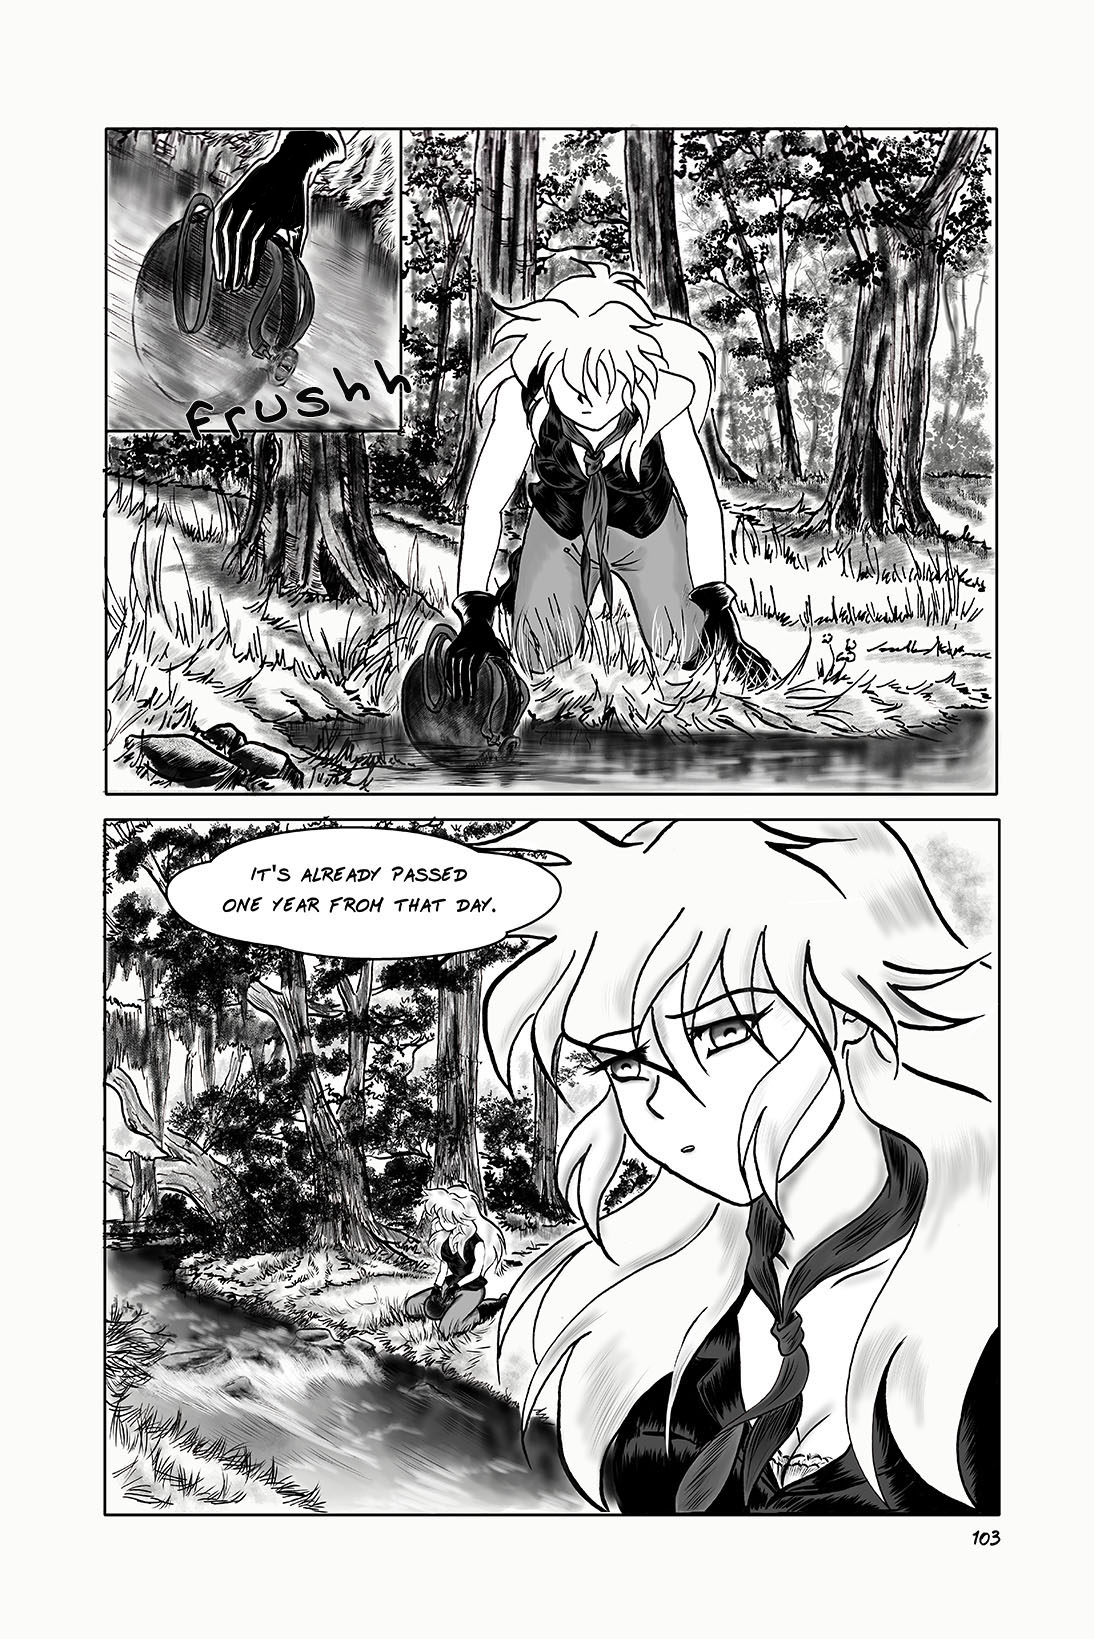 Page 103-Legends of the West black and white comic page manga girl getting water in a creek